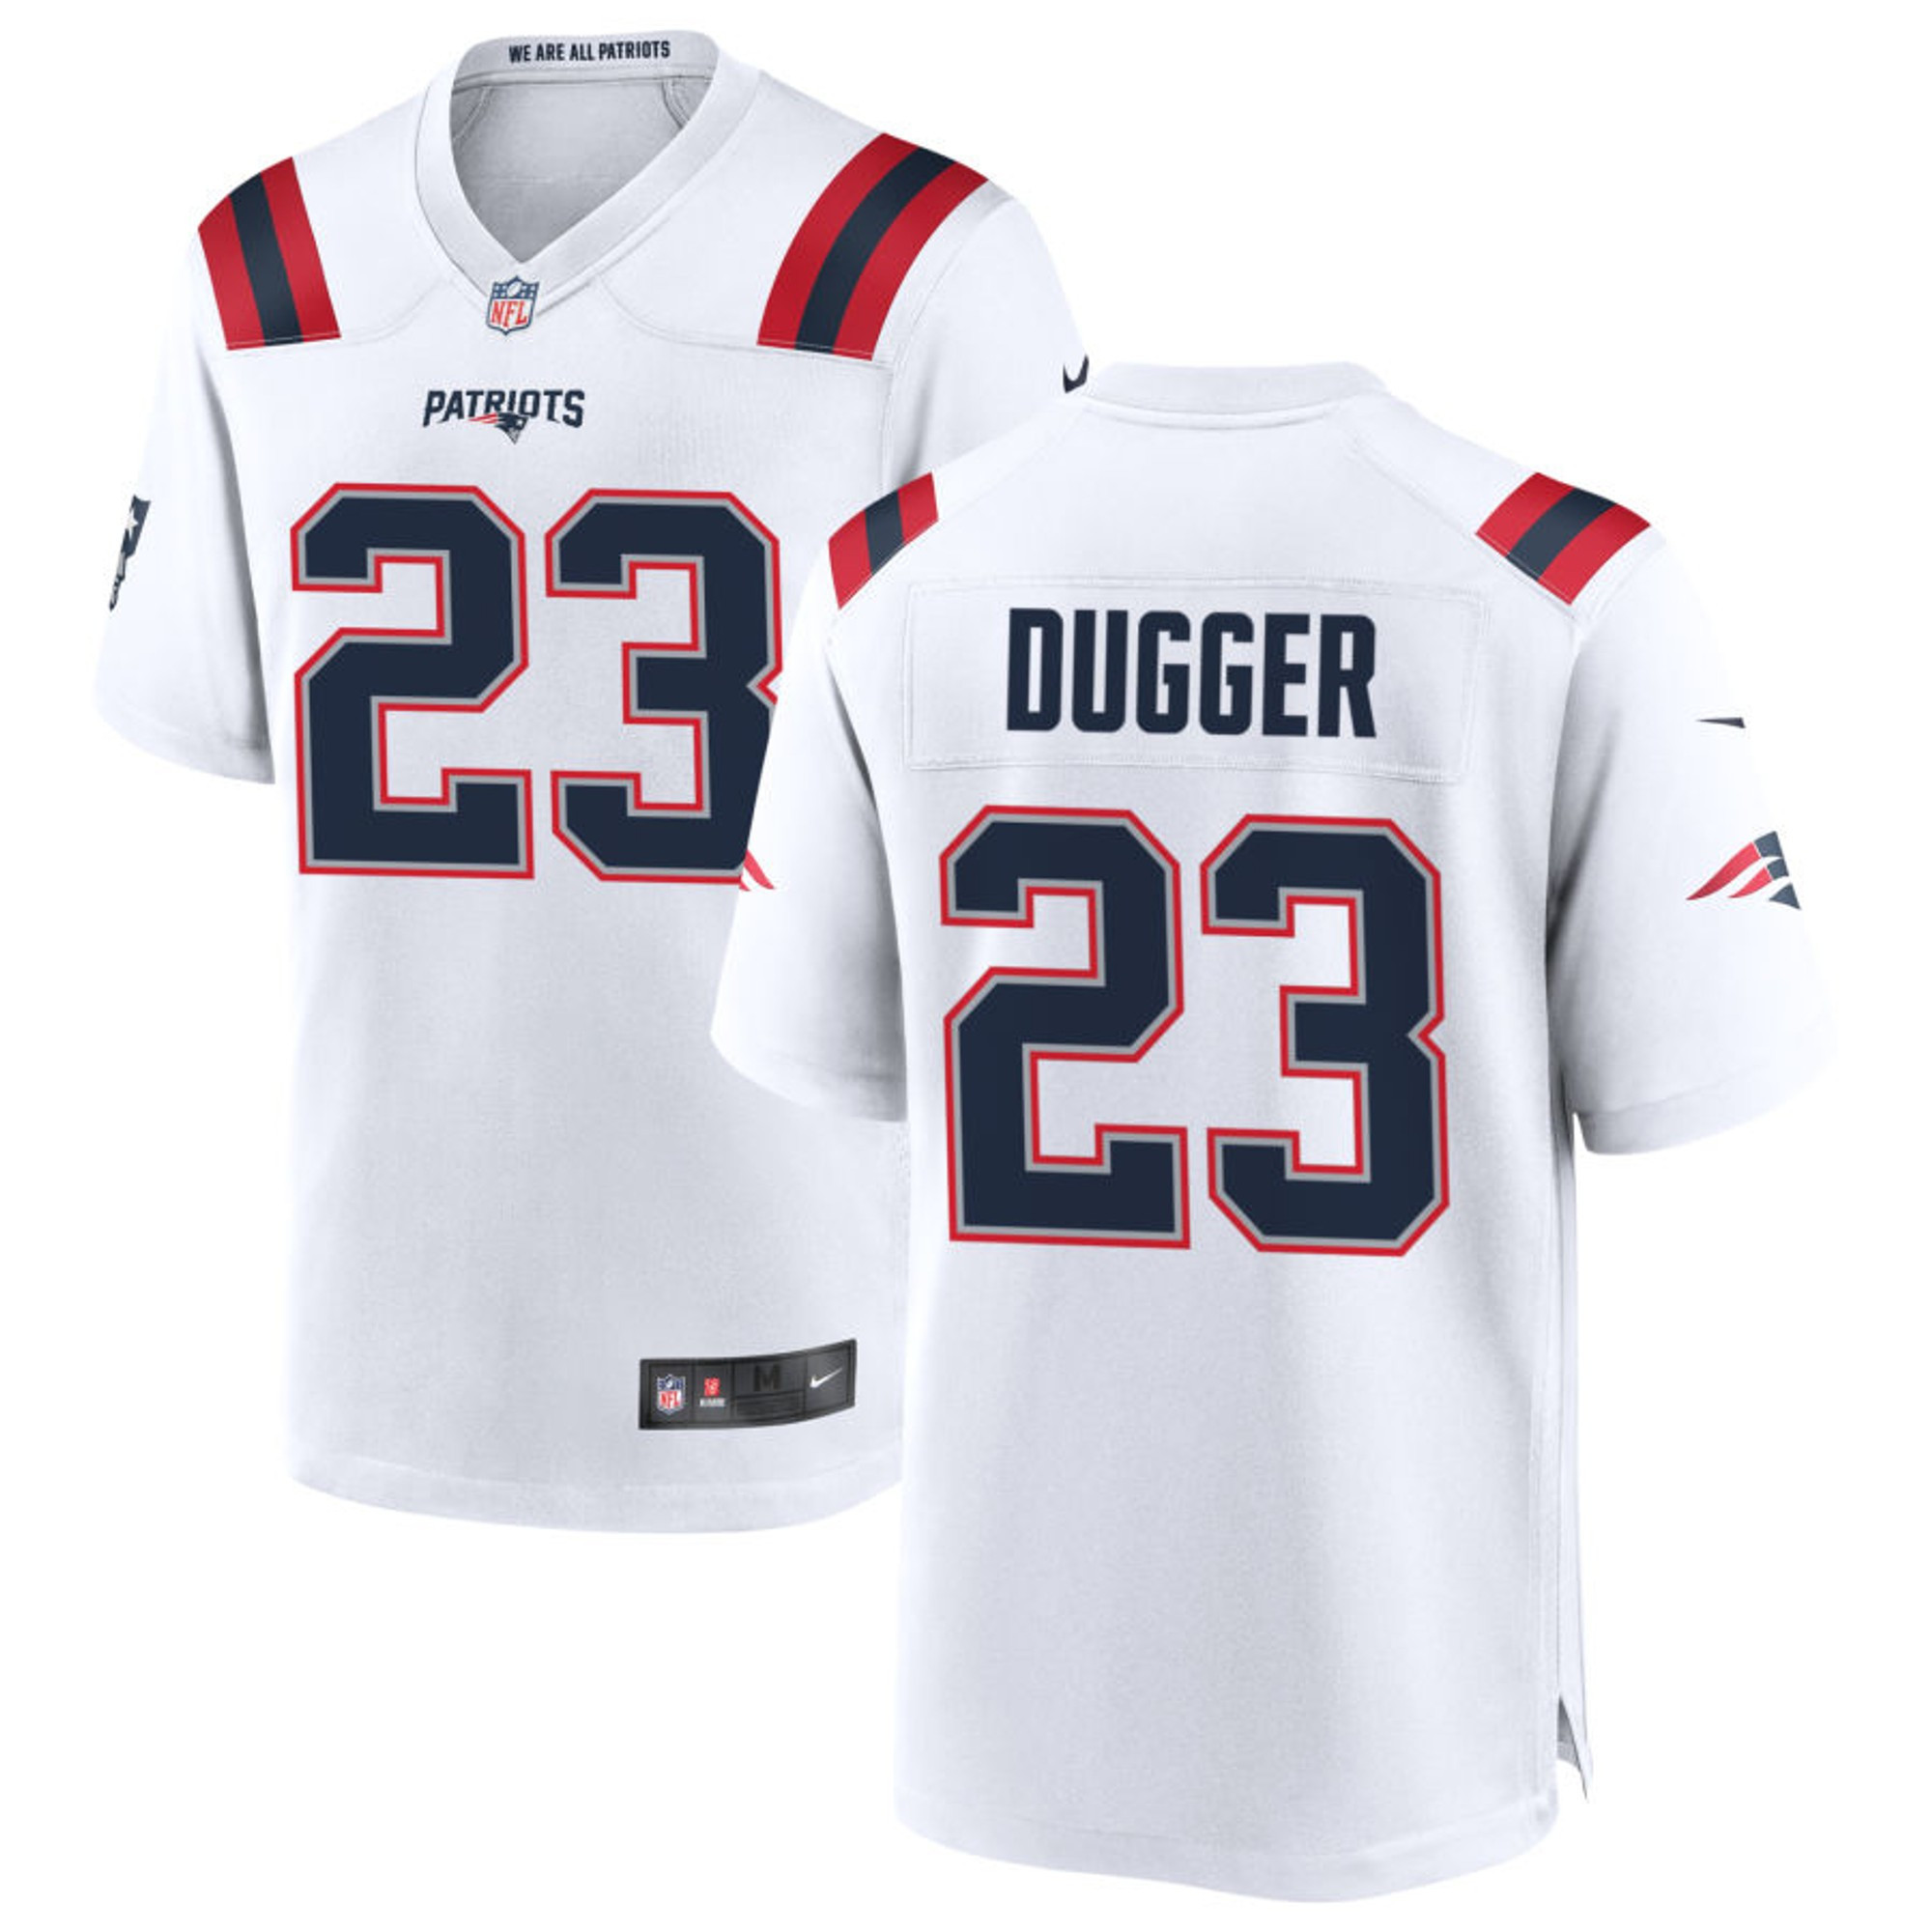 Kyle Dugger New England Patriots White Jersey - All Stitched